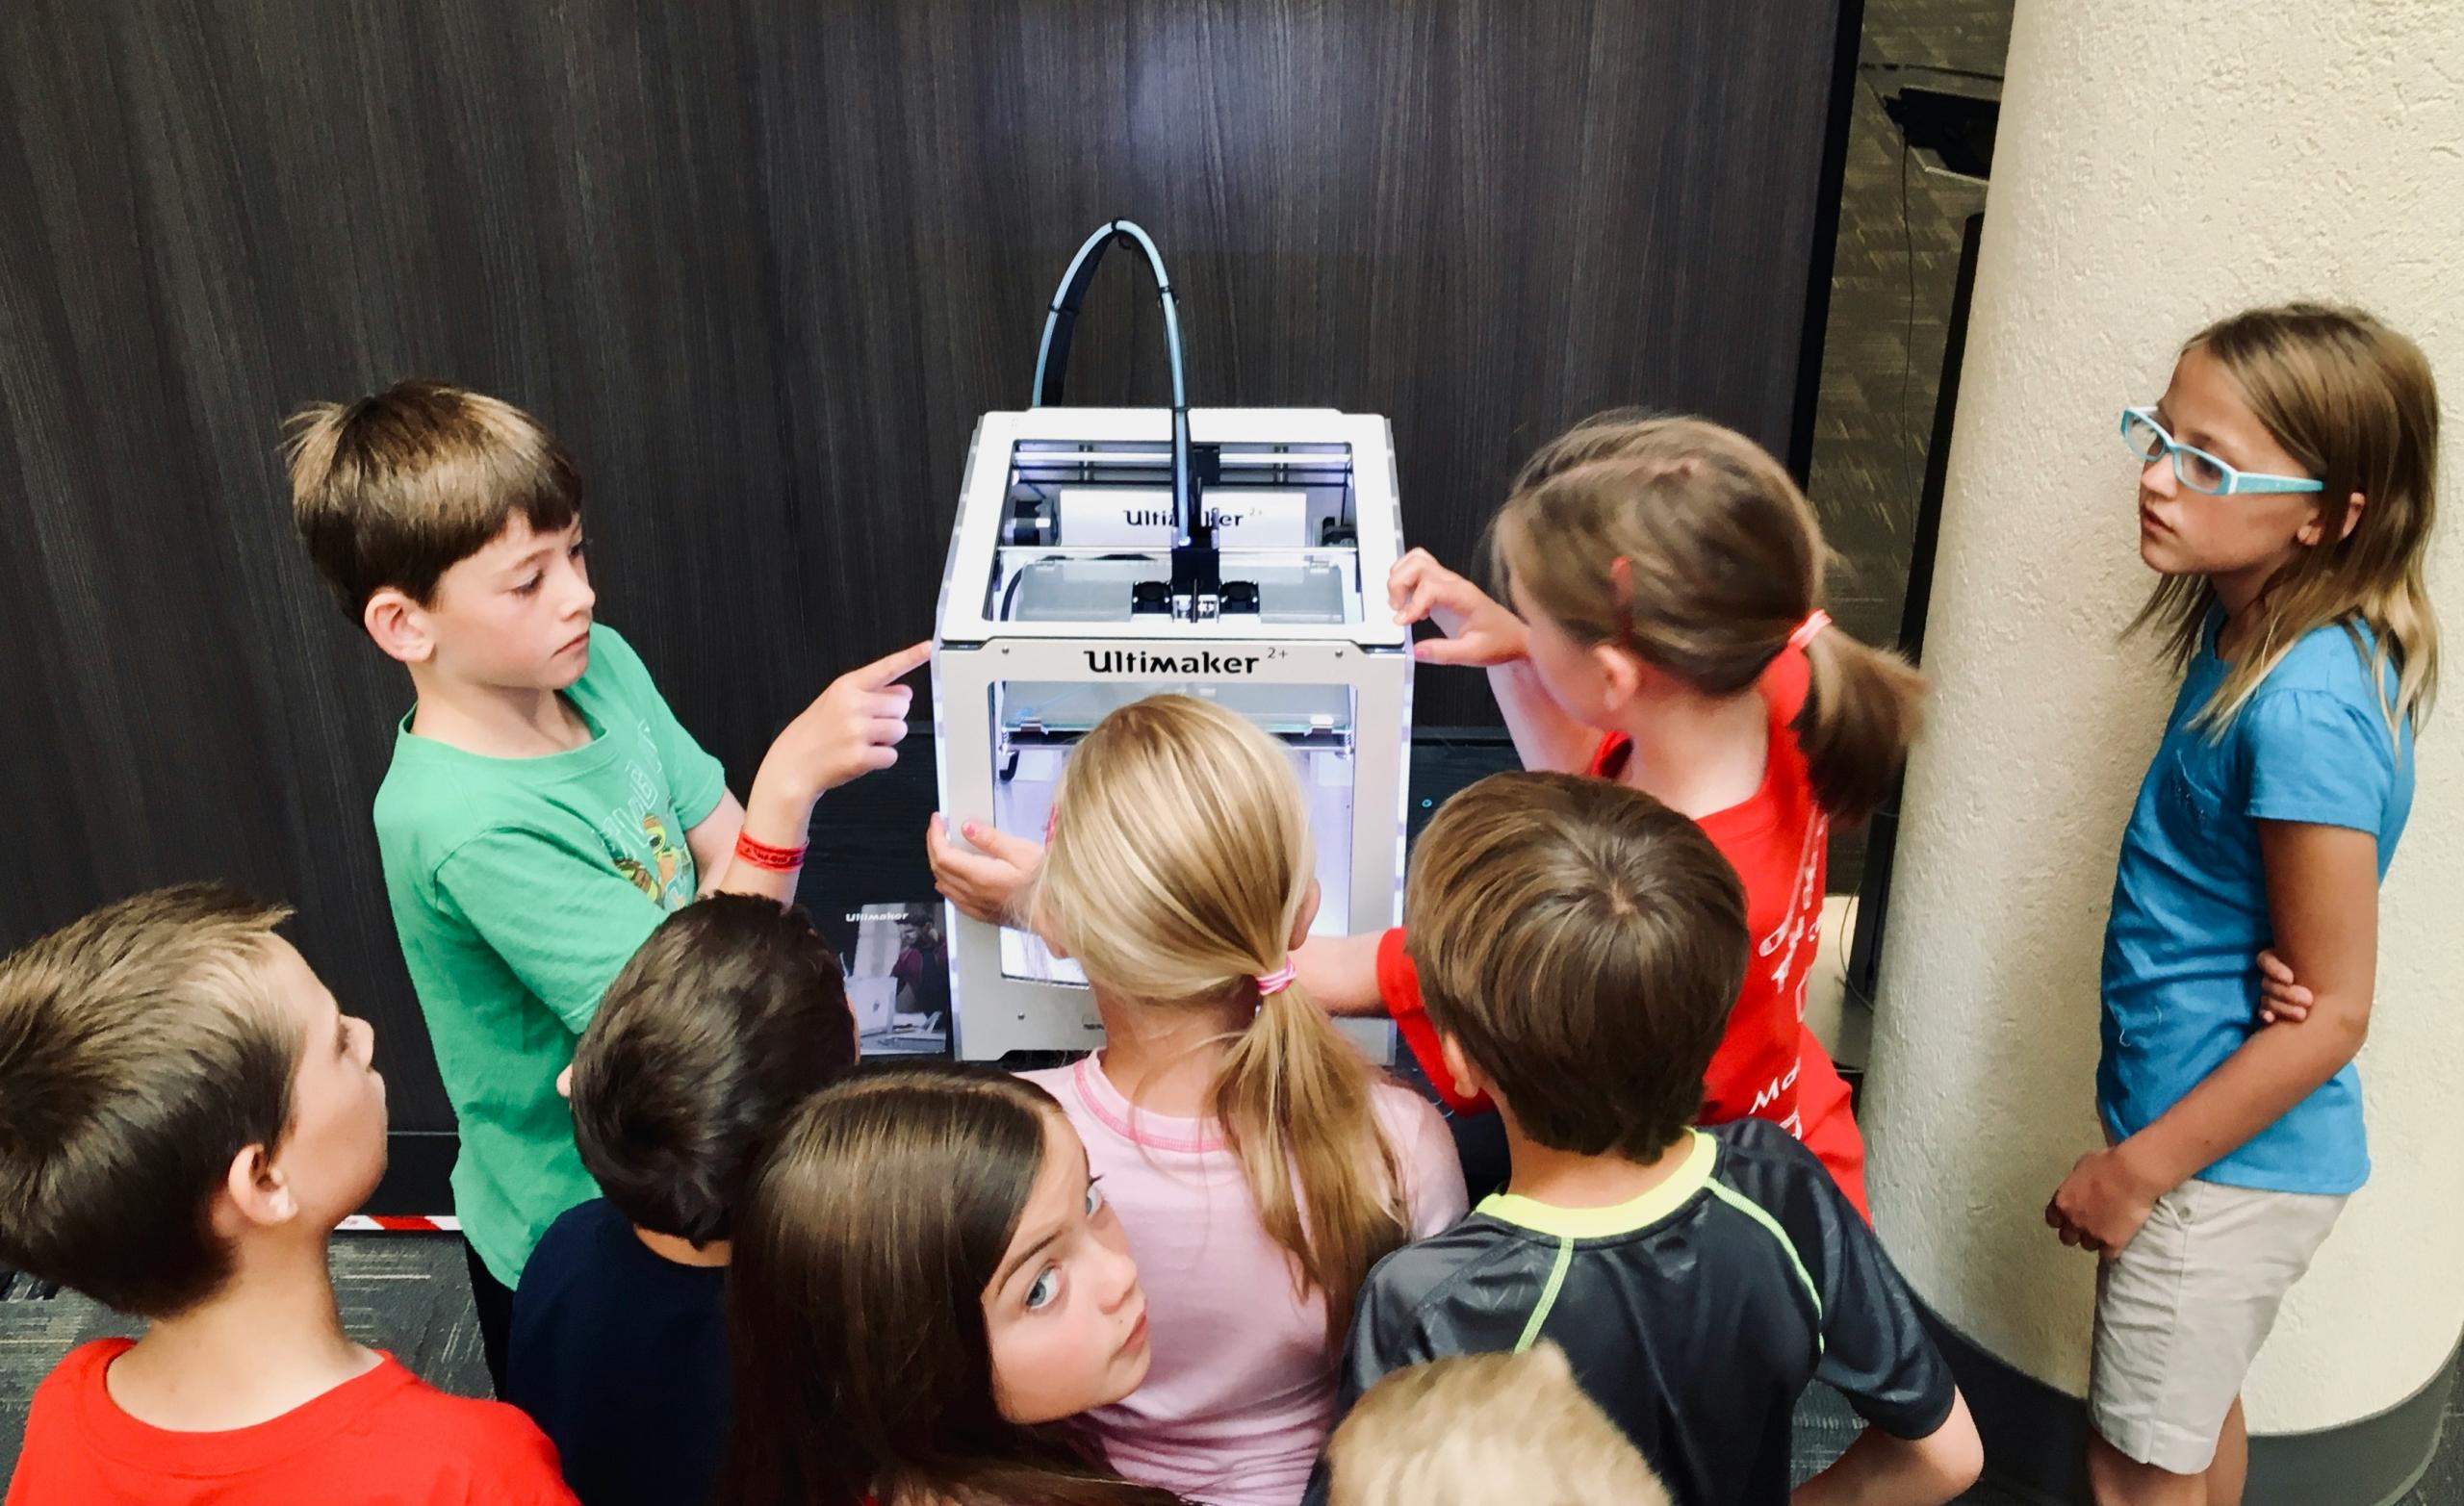 3rd grade students standing around a 3D printer in the classroom